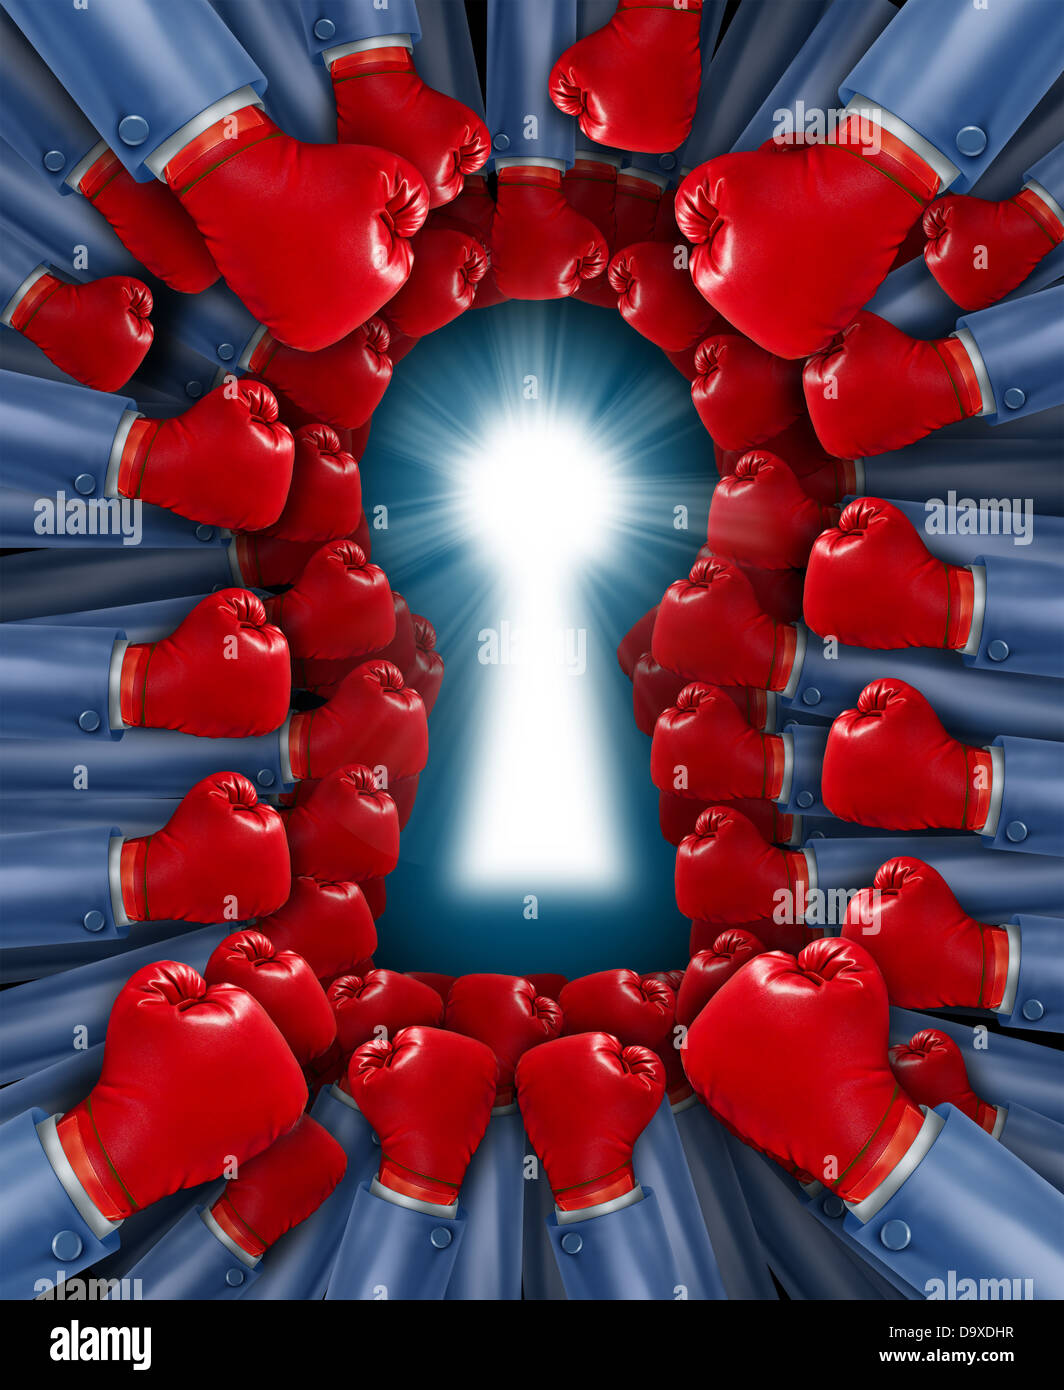 Competition key as a concept for a fight for the cure with an organized group of red boxing gloves fighting together to find a cure or solution shaped as a glowing lock hole. Stock Photo